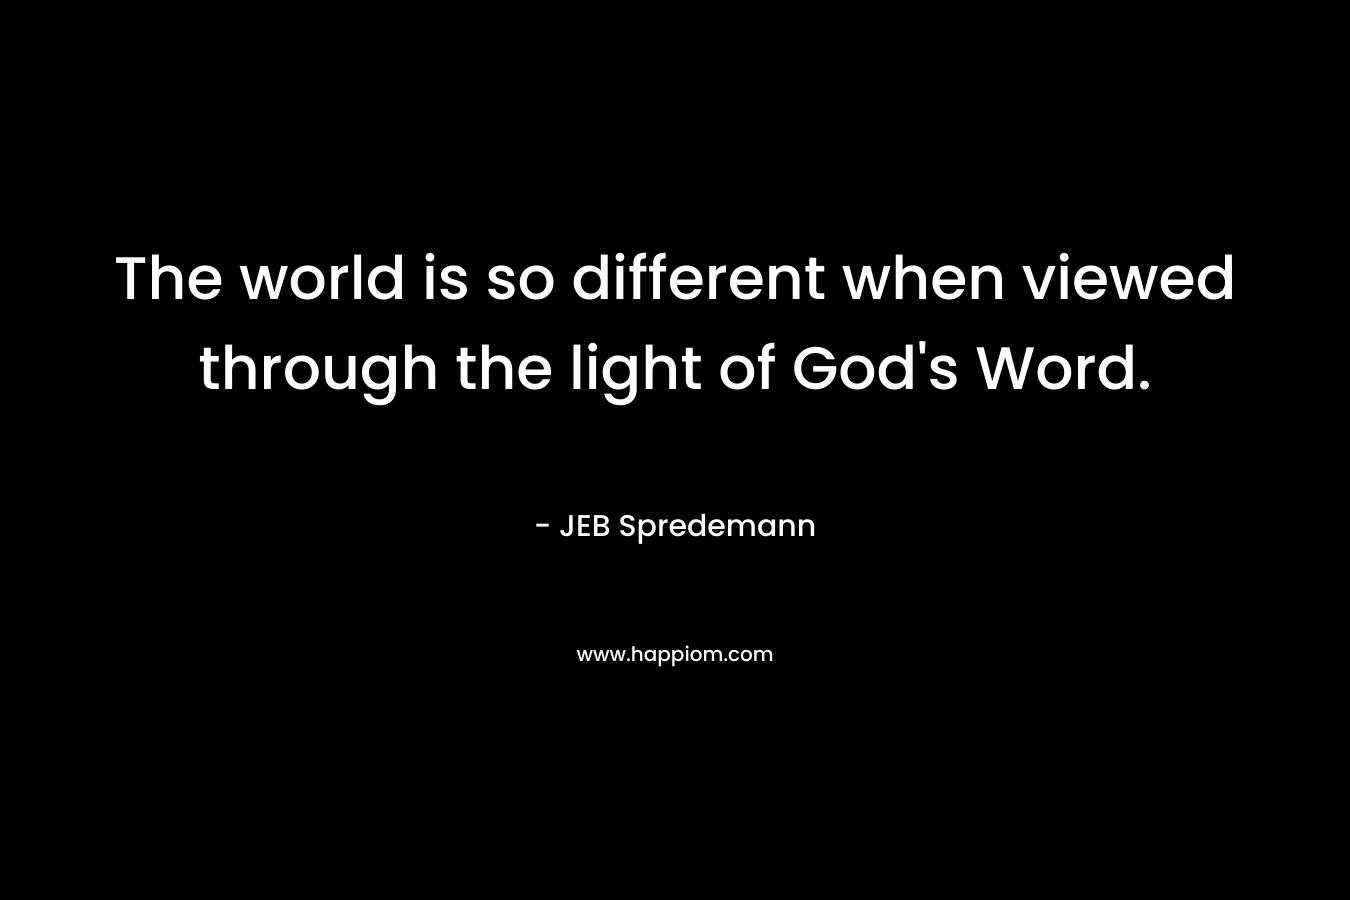 The world is so different when viewed through the light of God's Word.